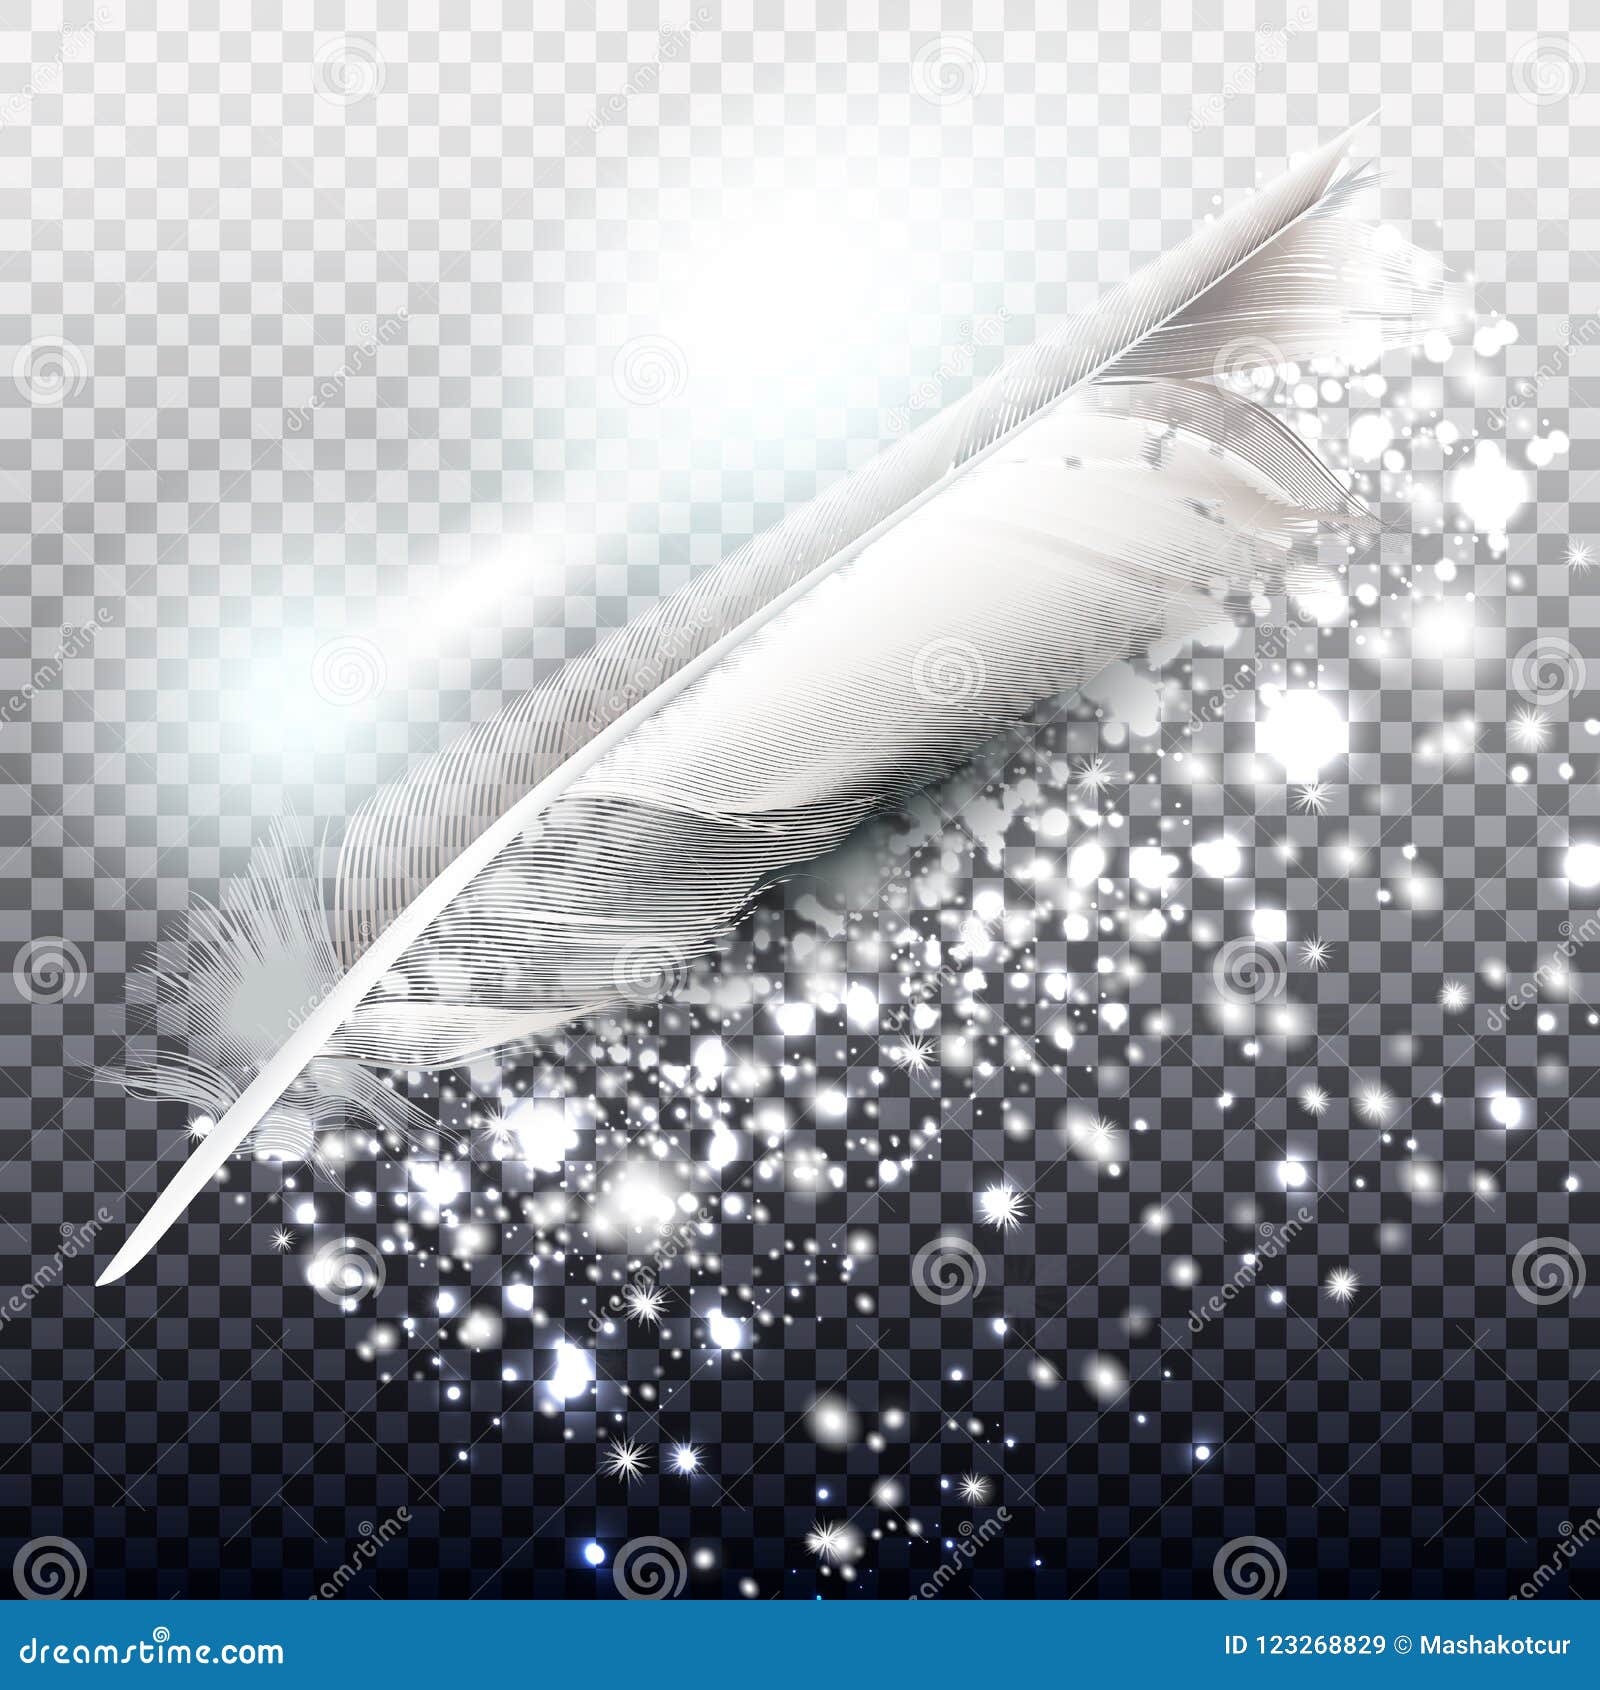 Silver glitter particles on white background Vector Image